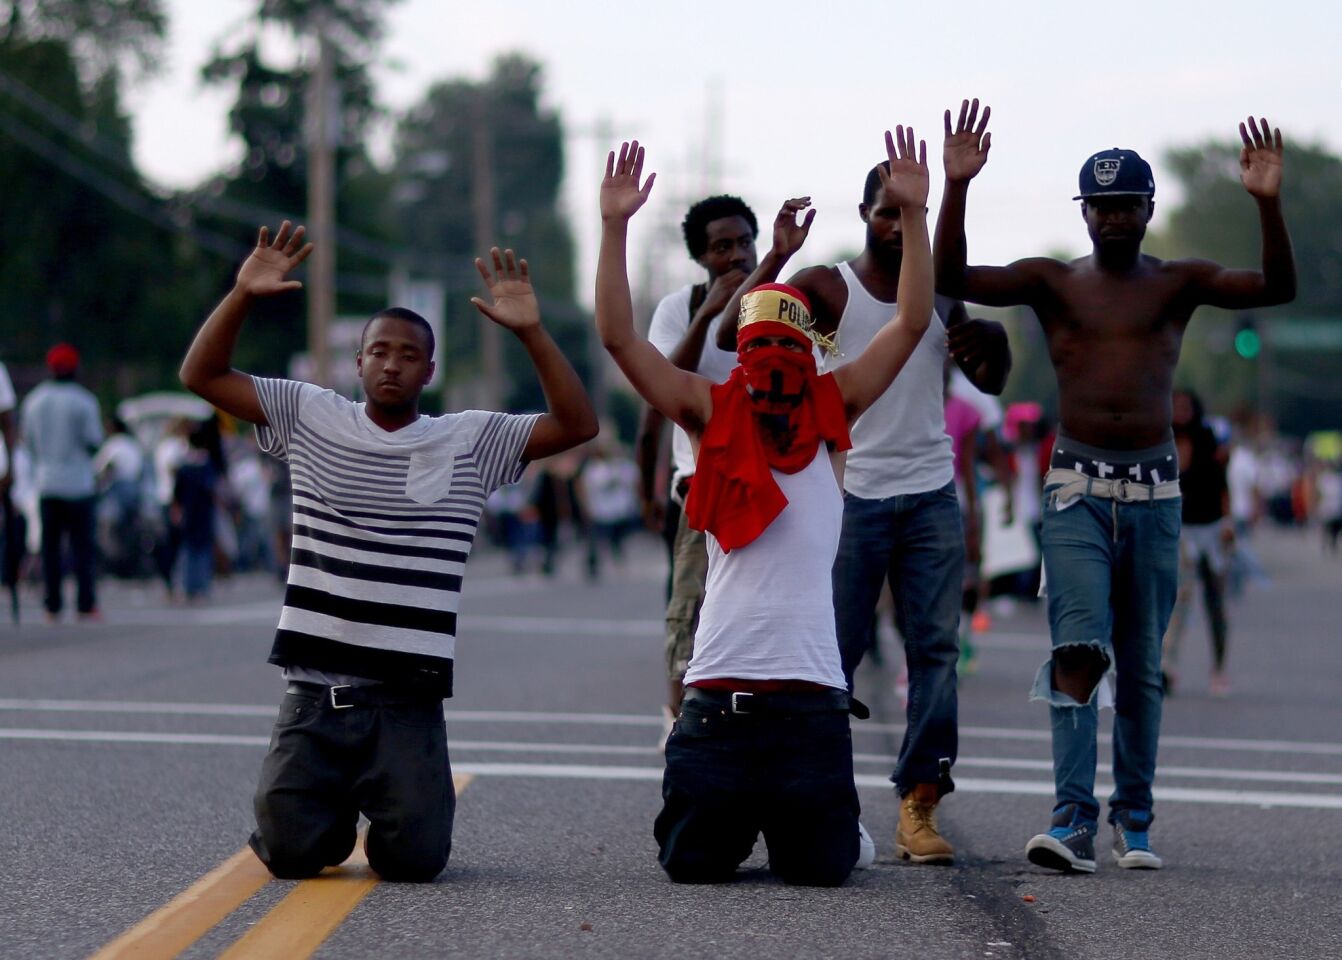 Demonstrators on Sunday raise their hands during a protest over the police shooting death of Michael Brown, who was unarmed.